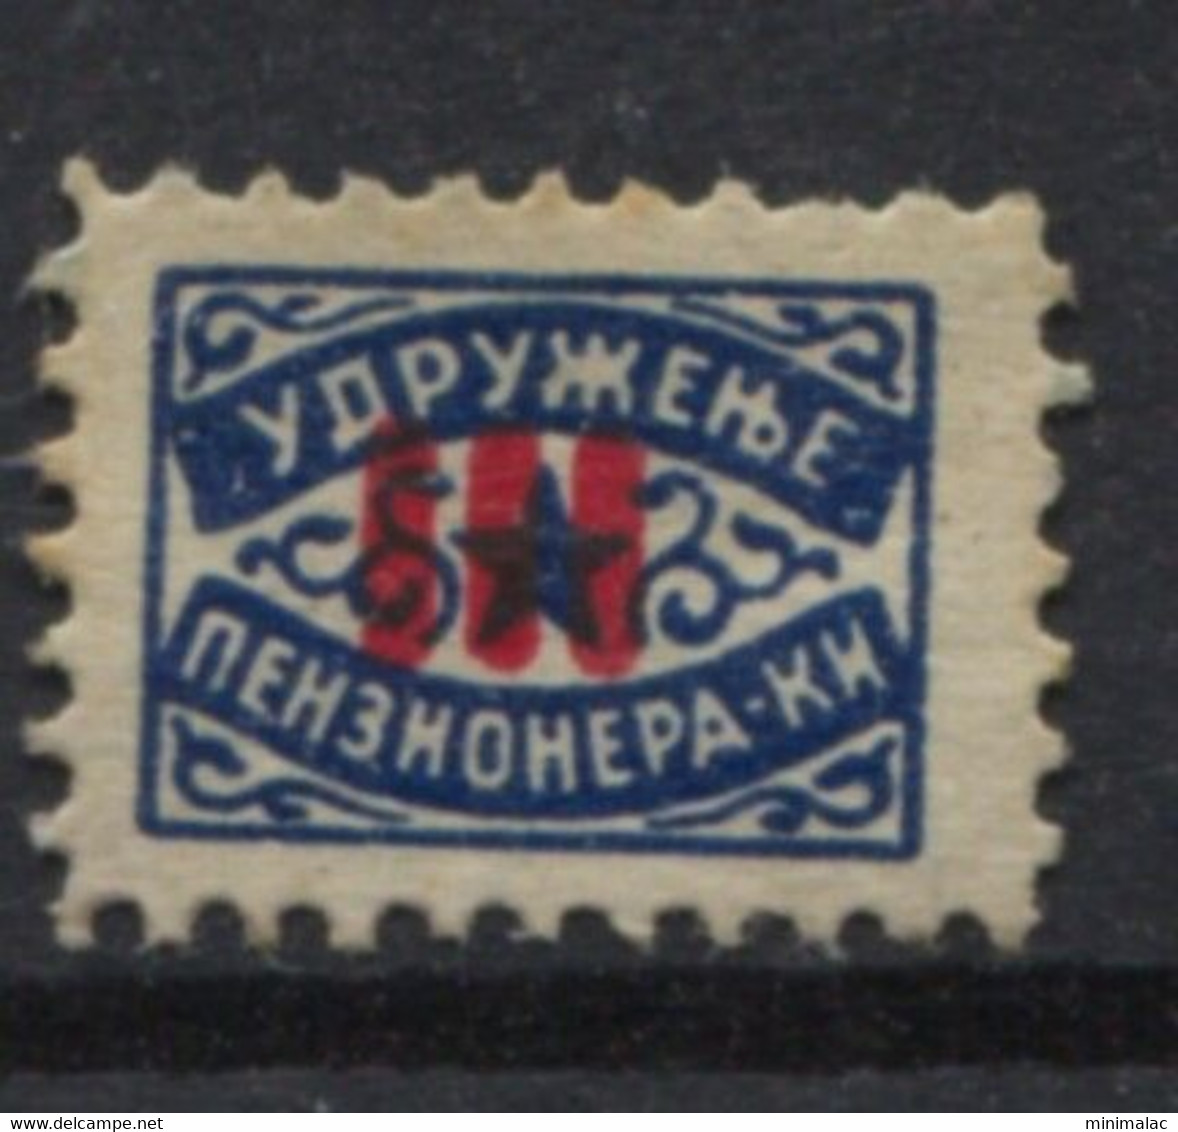 Yugoslavia 1951, Stamp For Membership, Retired Association, Star Administrative Stamp - Revenue, Overprinted With III - Oficiales